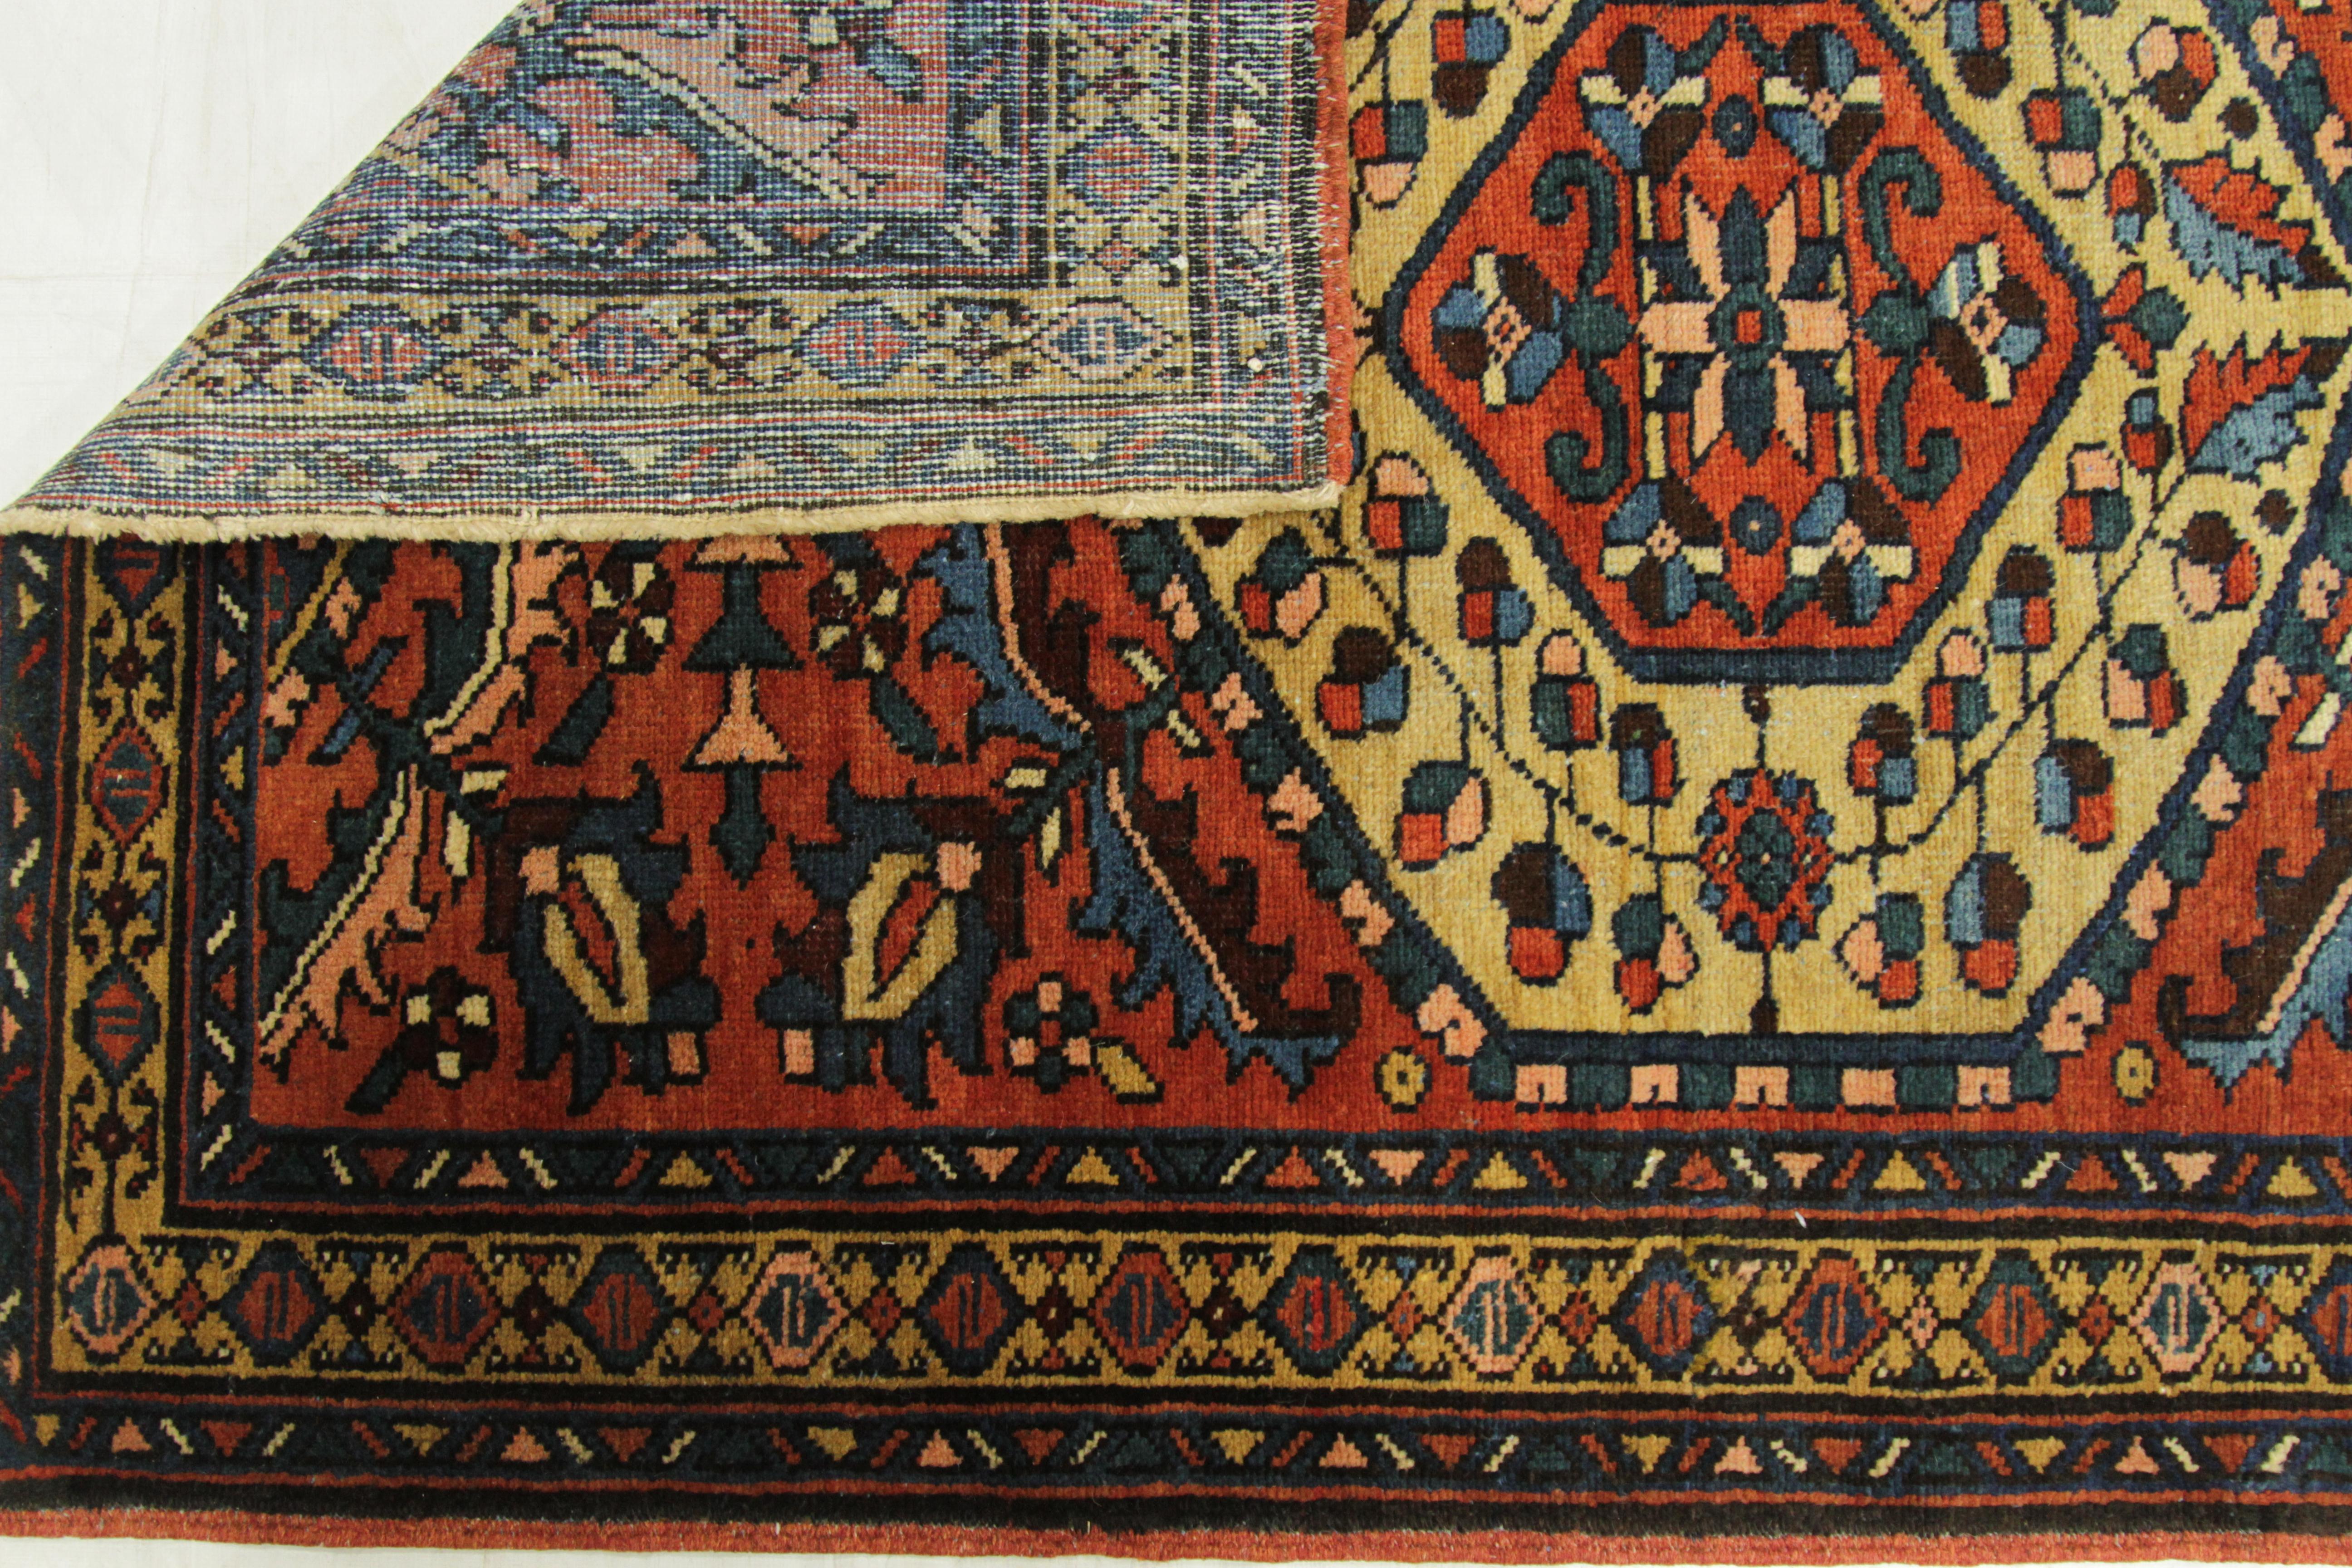 Antique Persian Rug Azerbaijan Design with Nature-Inspired Patterns, circa 1960s For Sale 1